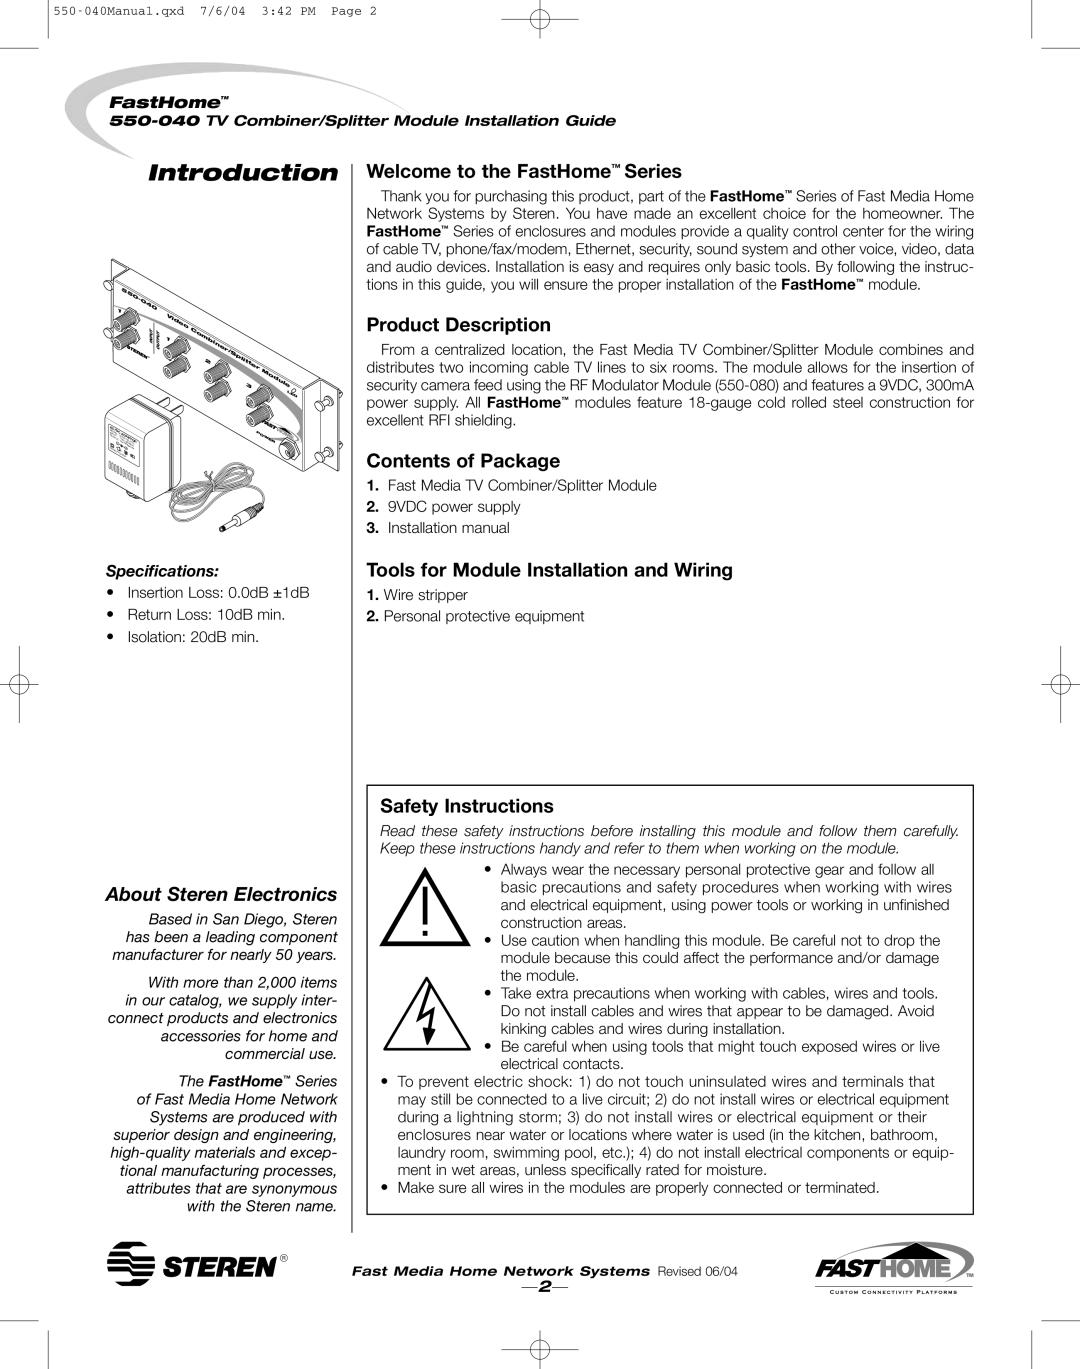 Steren 550-040 Introduction, Welcome to the FastHome Series, Product Description, Contents of Package, Safety Instructions 